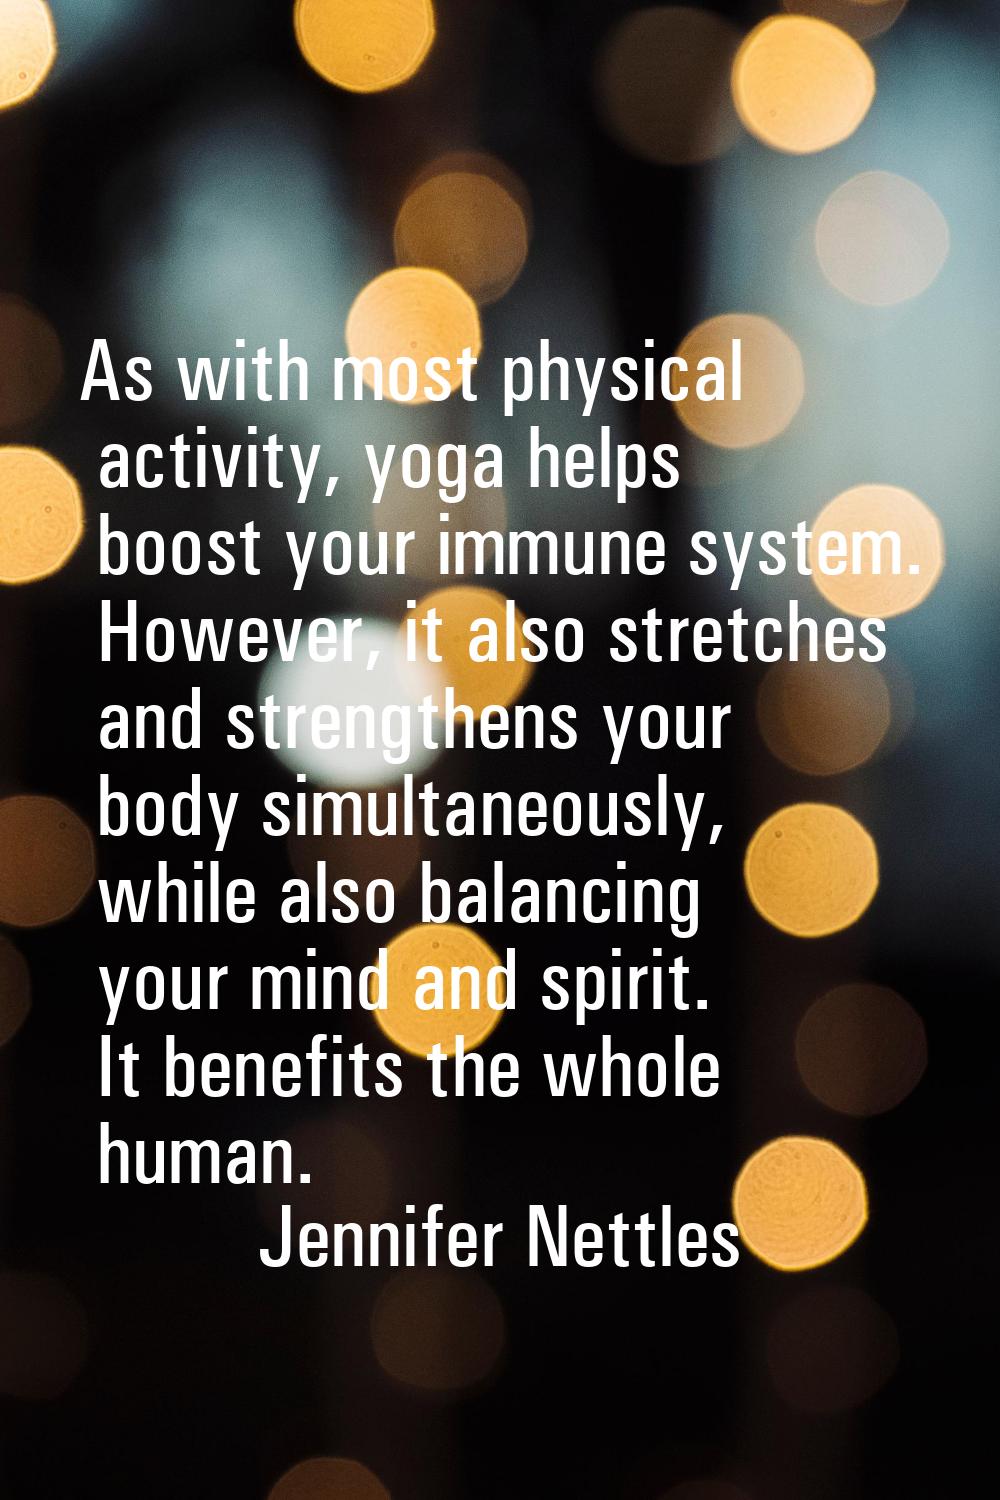 As with most physical activity, yoga helps boost your immune system. However, it also stretches and